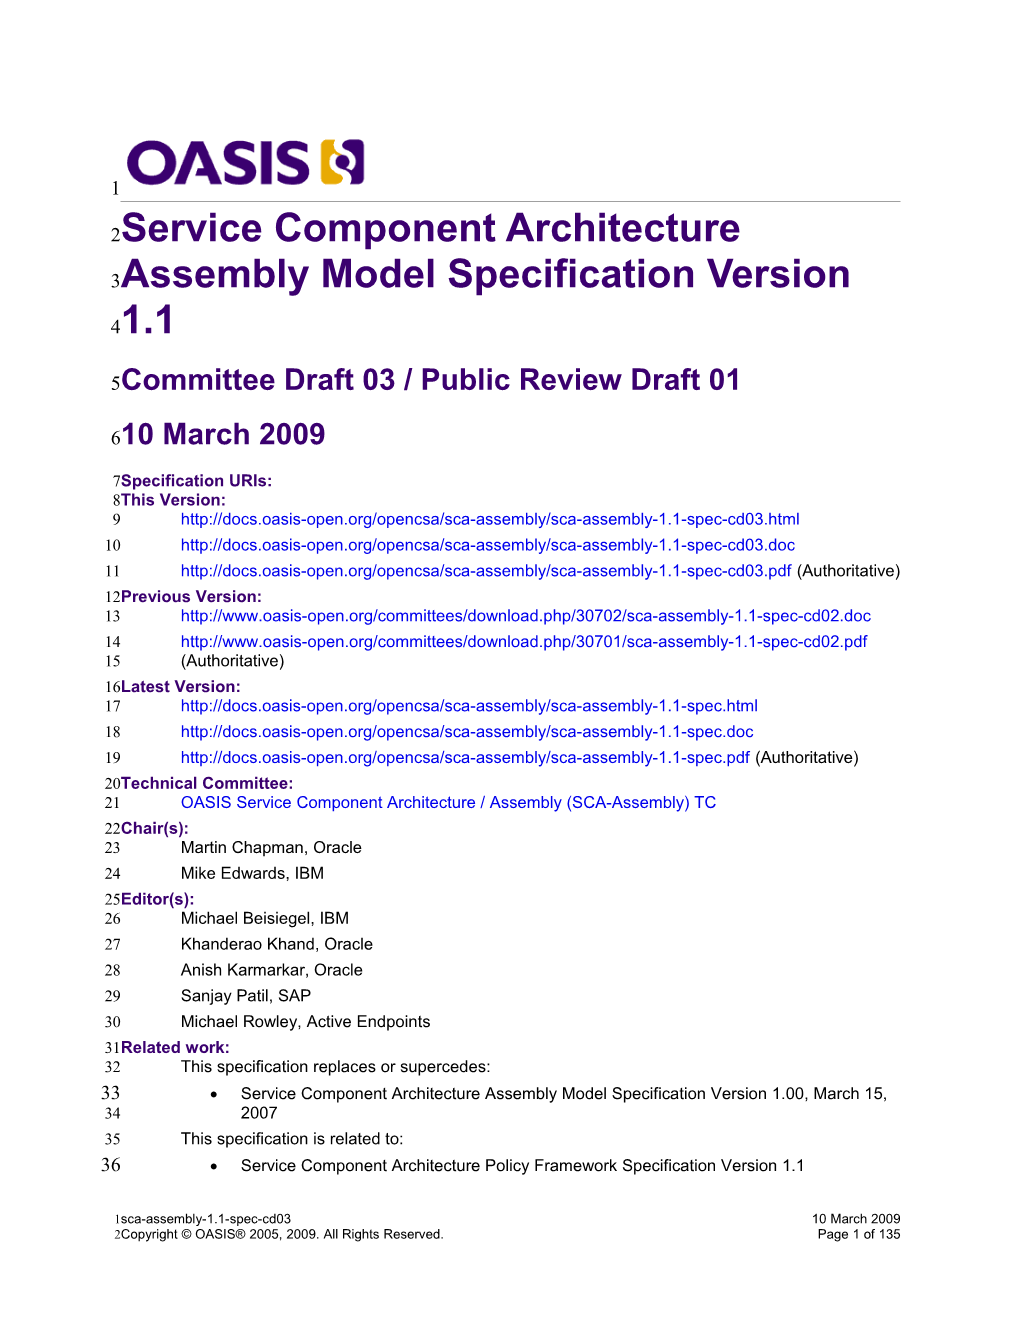 Service Component Architecture Assembly Model Specification Version 1.1